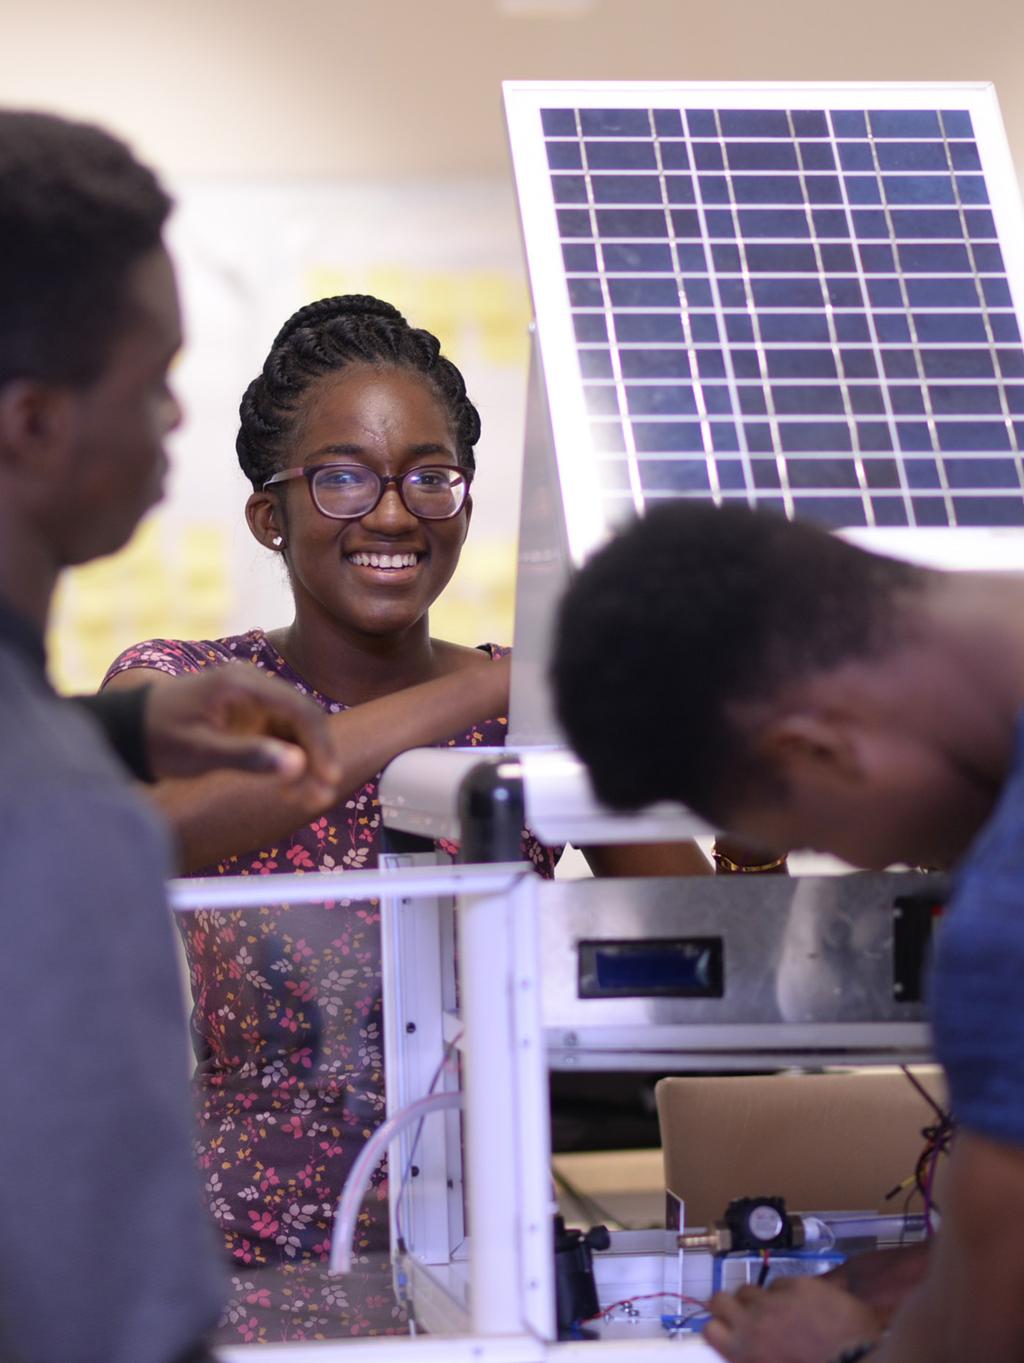 ASHESI PREPARES STUDENTS TO CREATE PROGRESS IN AFRICA Since 2002, Ashesi has offered young Africans a high-quality, 4-year education on their home continent that fosters ethics, innovation, and